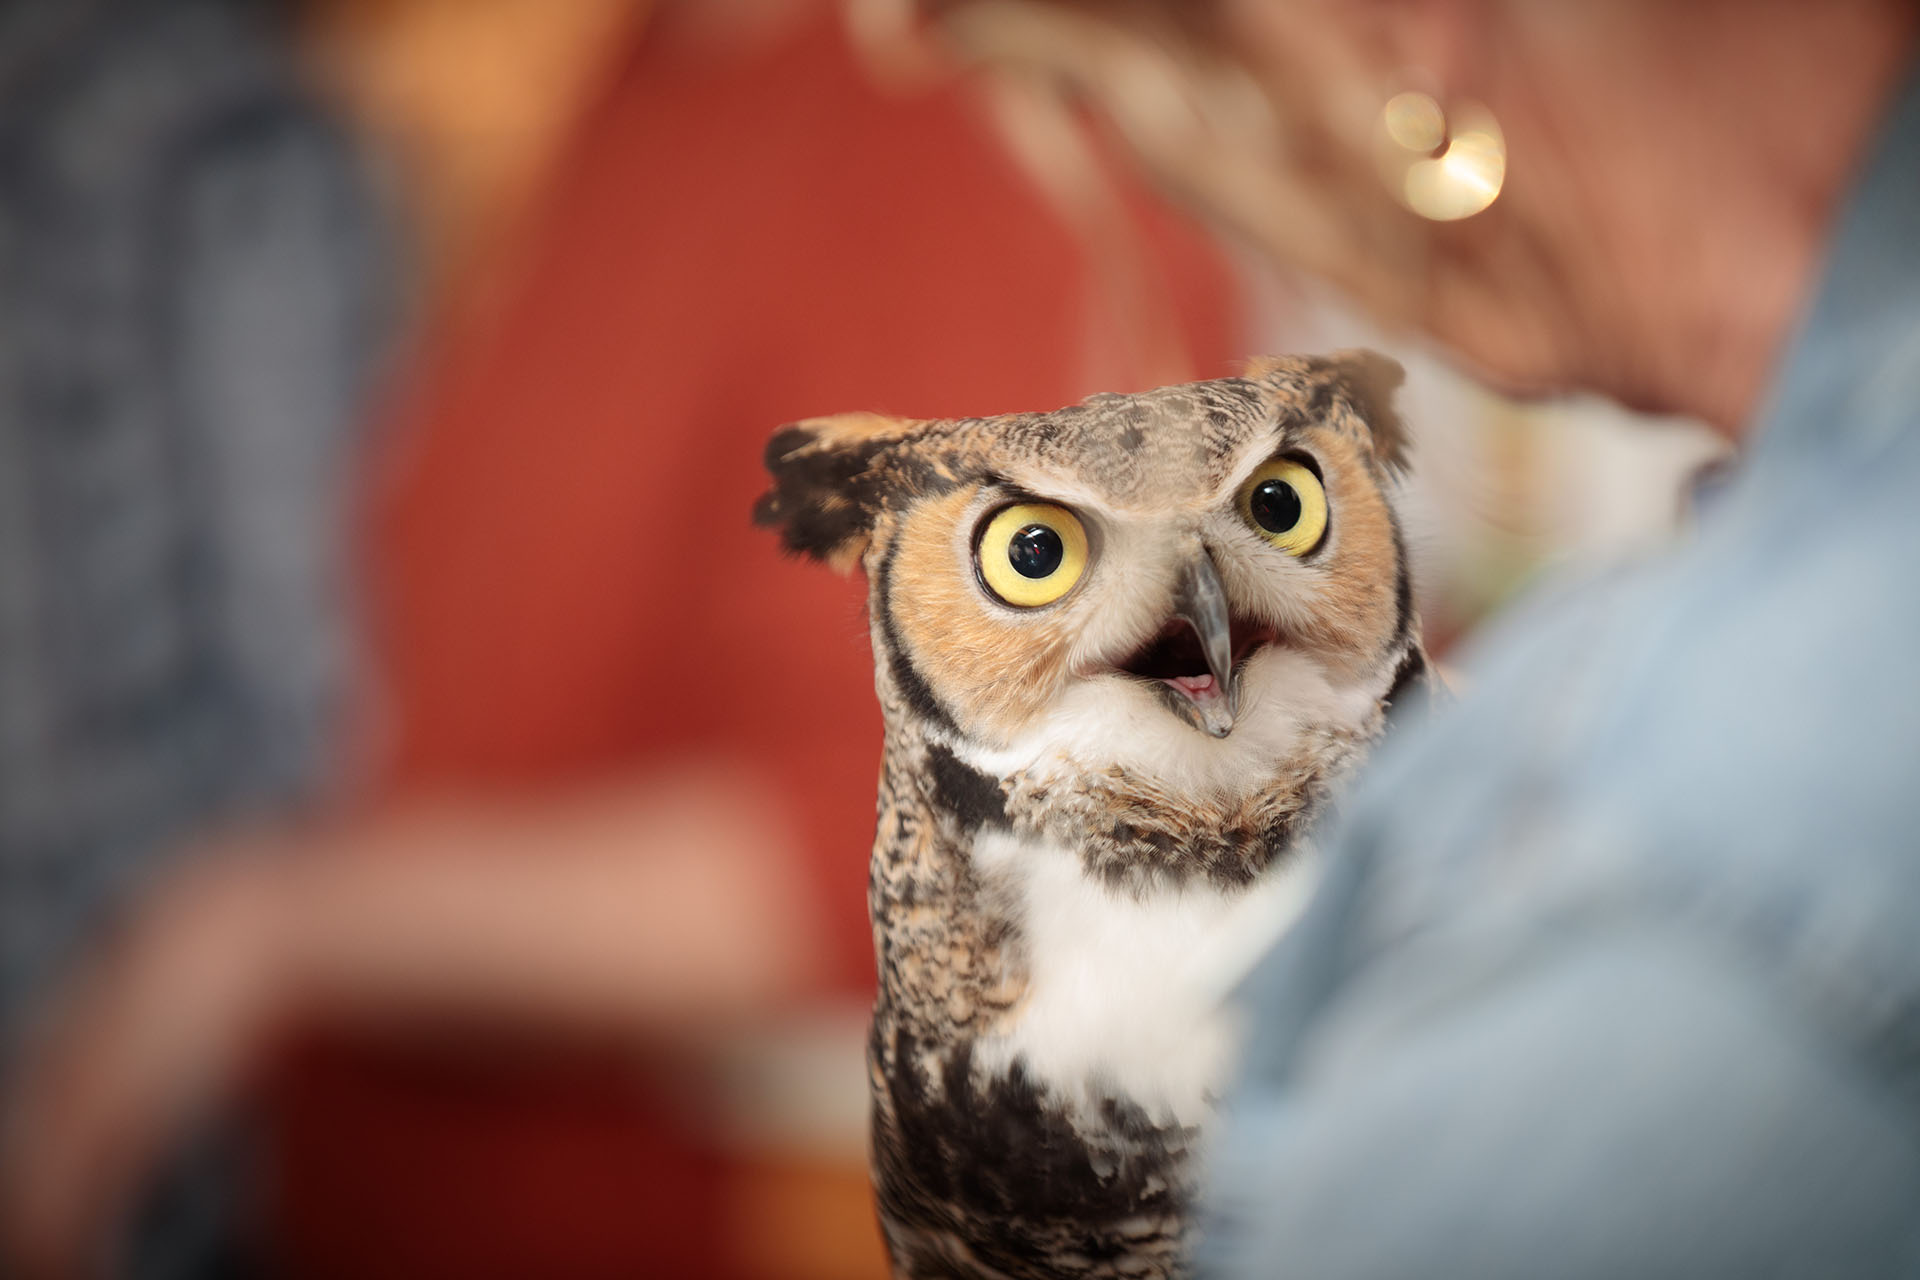 Learn about owls at UNMC’s next Science Café